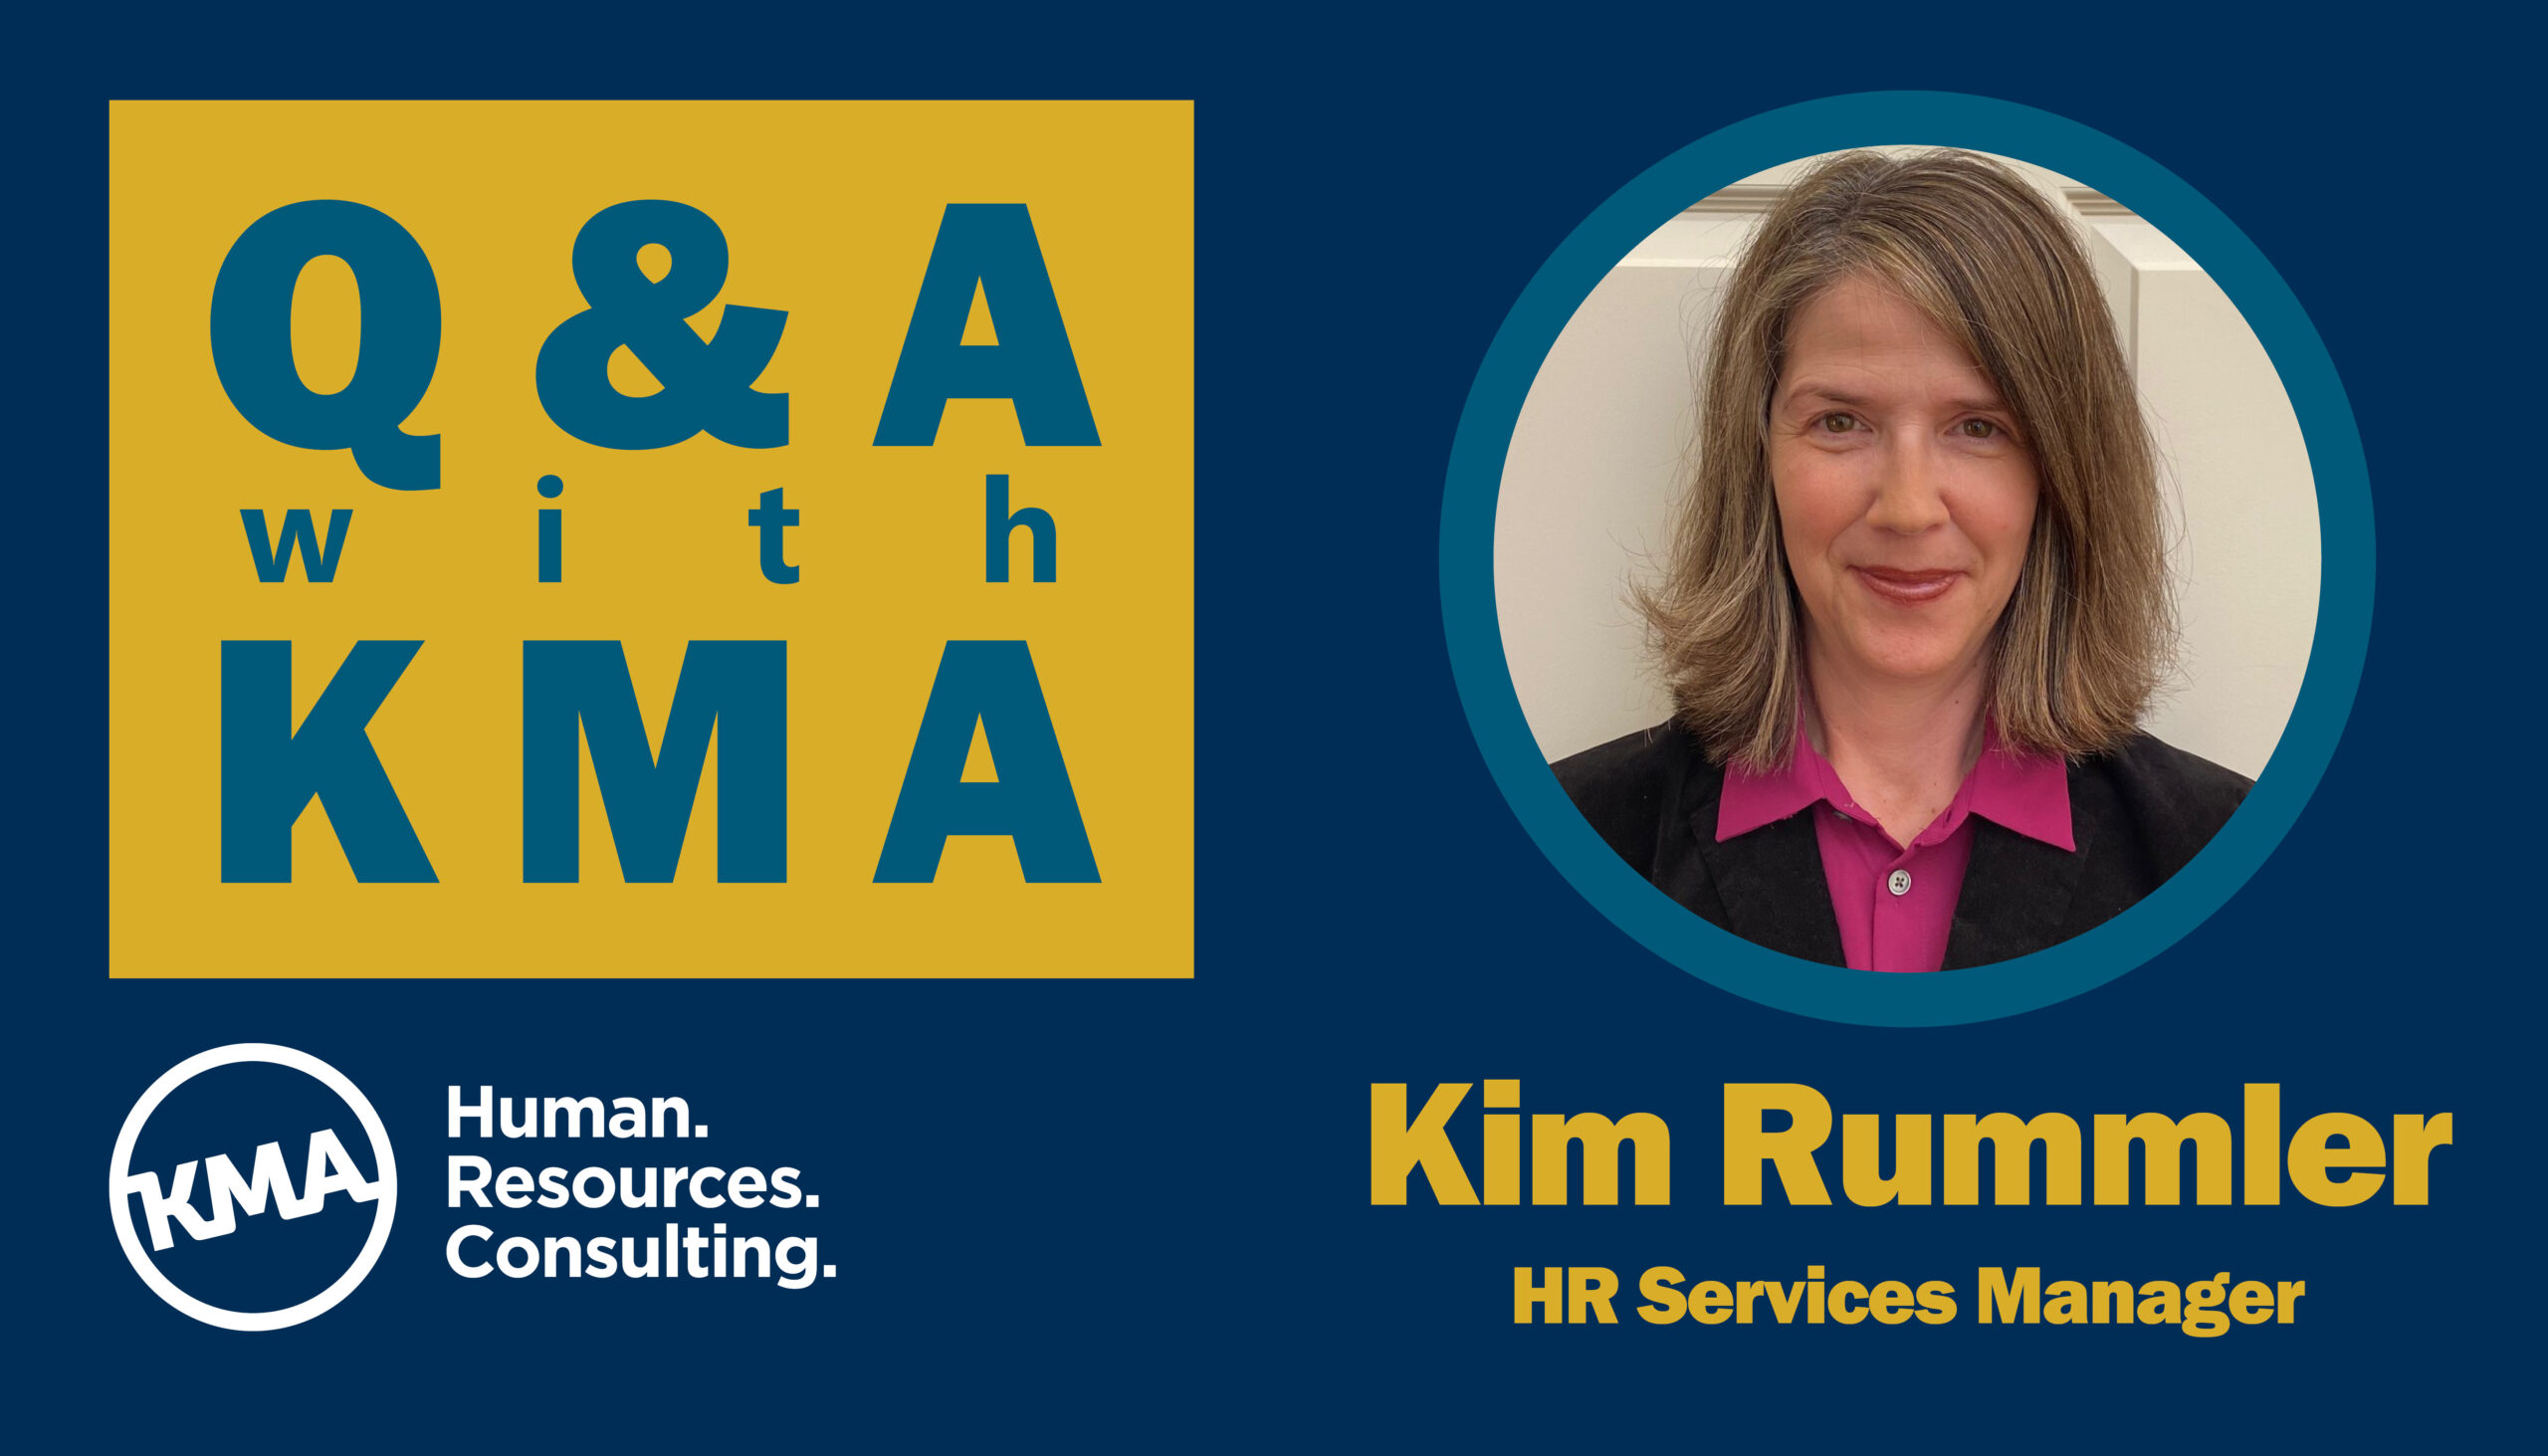 Graphic with the title Q&A with KMA and a photo of Kim Rummler, HR Services Manager